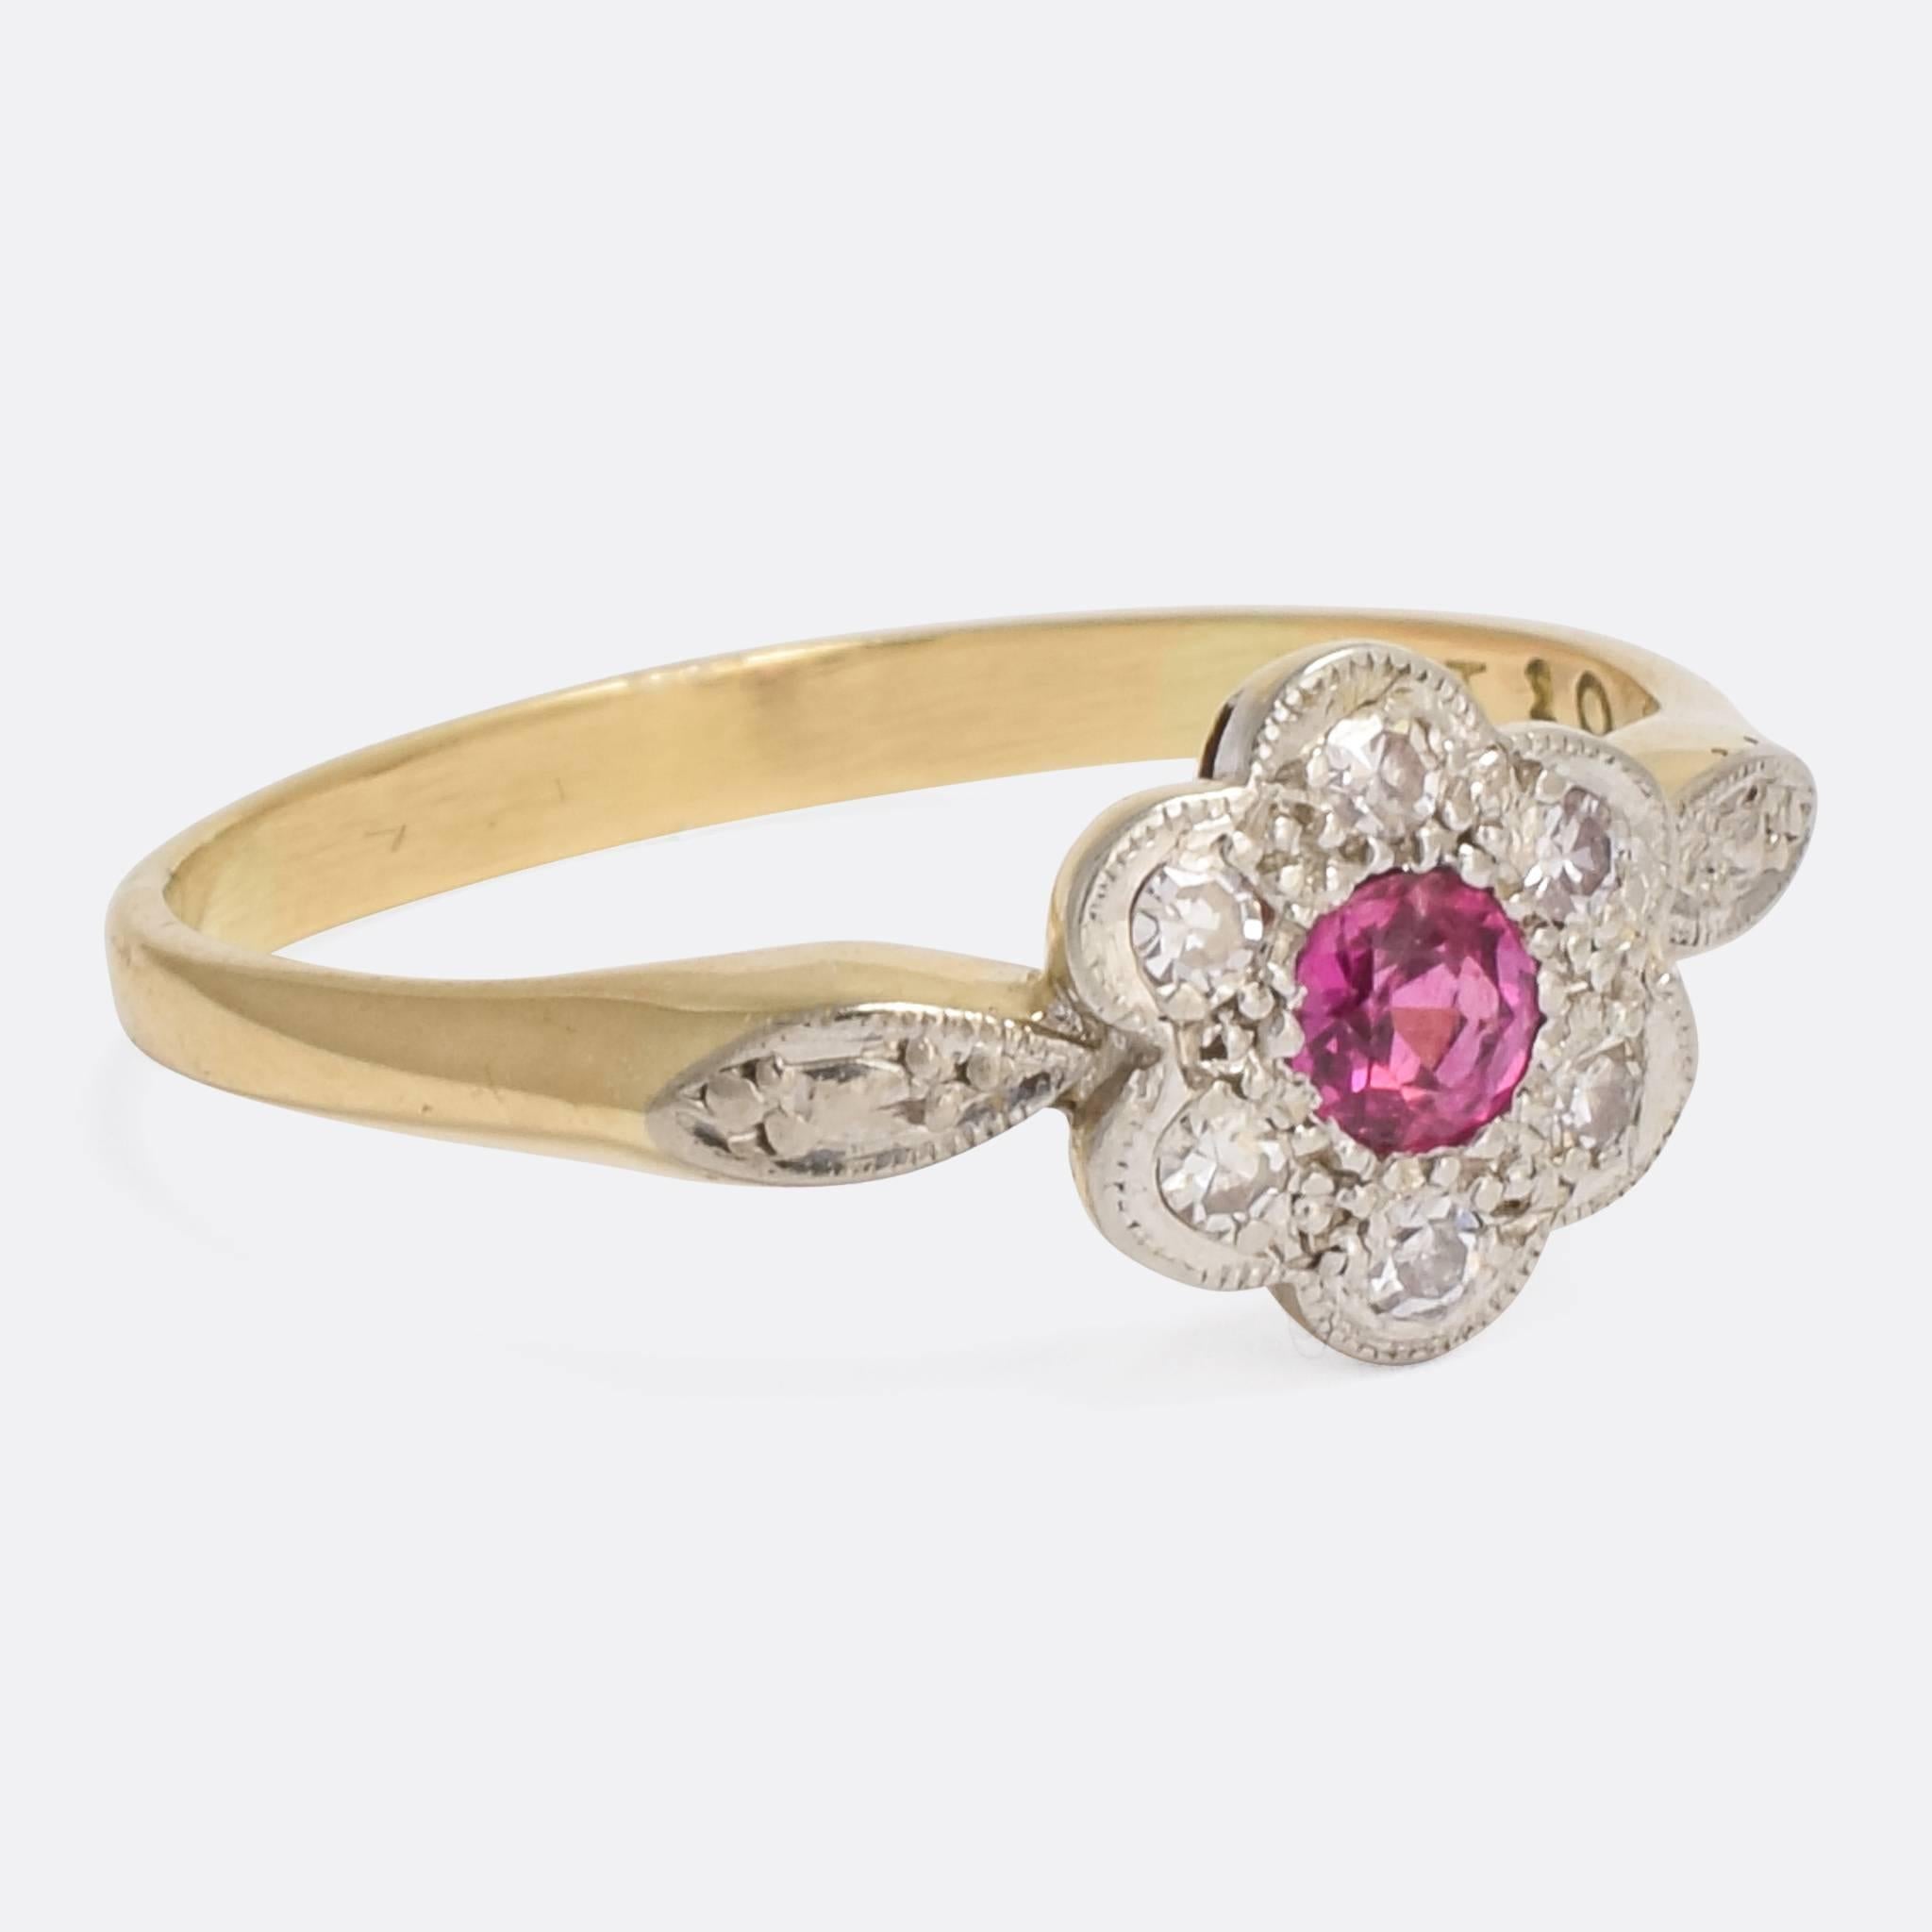 A sweet antique flower cluster ring, modelled in 18k gold with platinum tipped head. It's set with a central ruby, surrounded by six white diamonds. Finished in fine millegrain, with prominent platinum shoulder accents.

STONES
Natural Ruby (3.1mm)